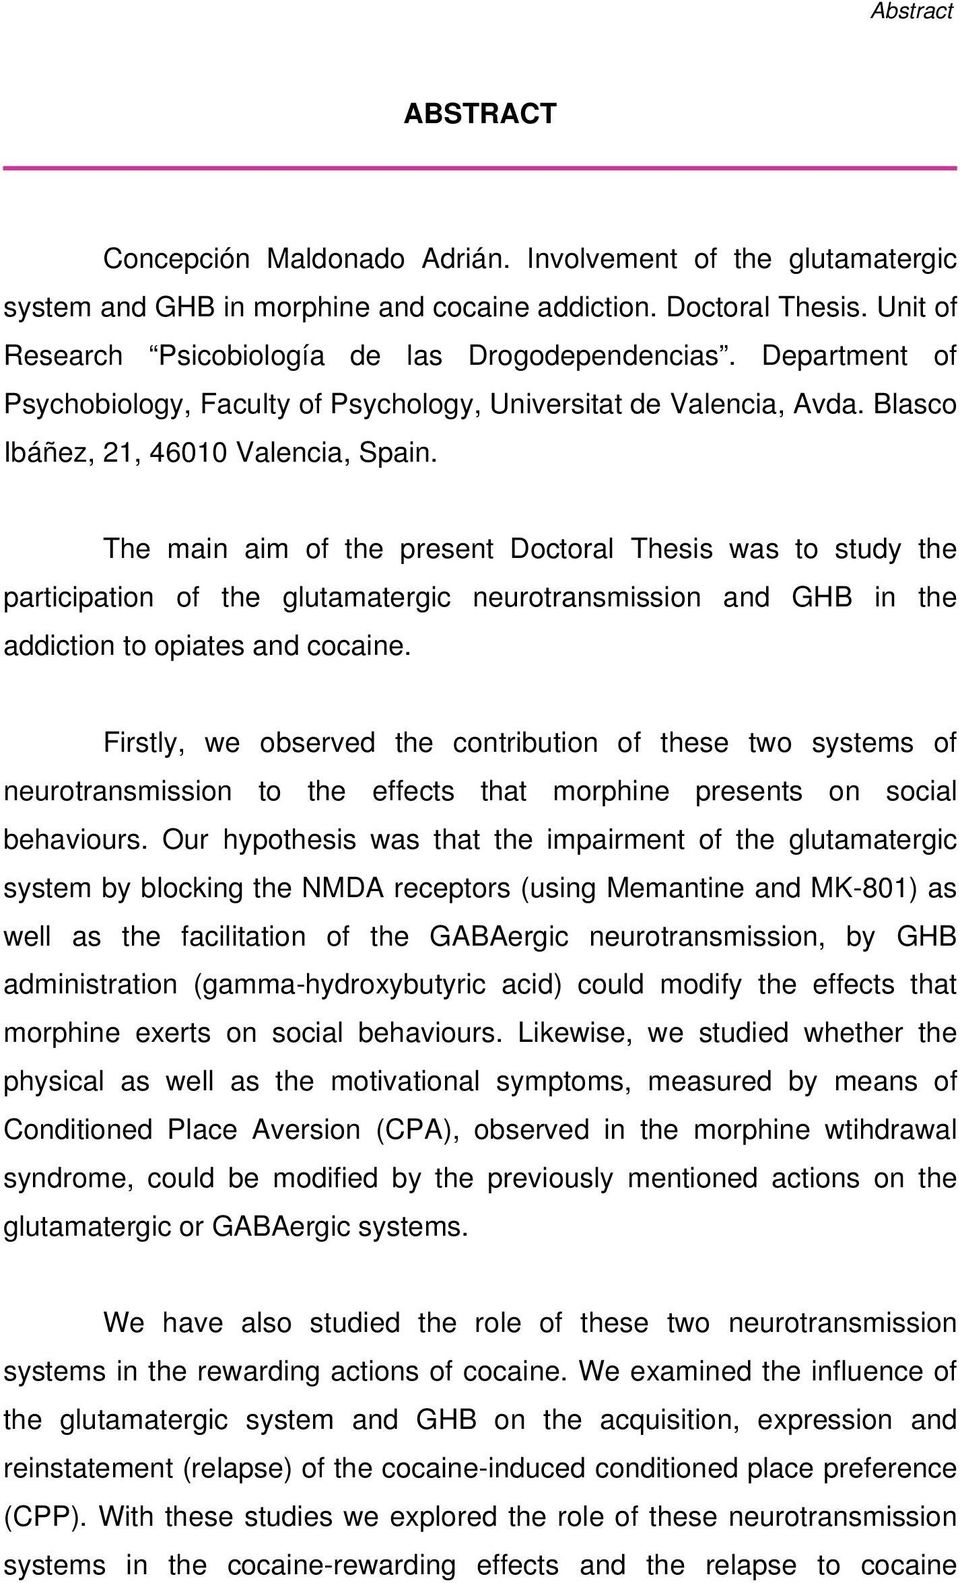 The main aim of the present Doctoral Thesis was to study the participation of the glutamatergic neurotransmission and GHB in the addiction to opiates and cocaine.